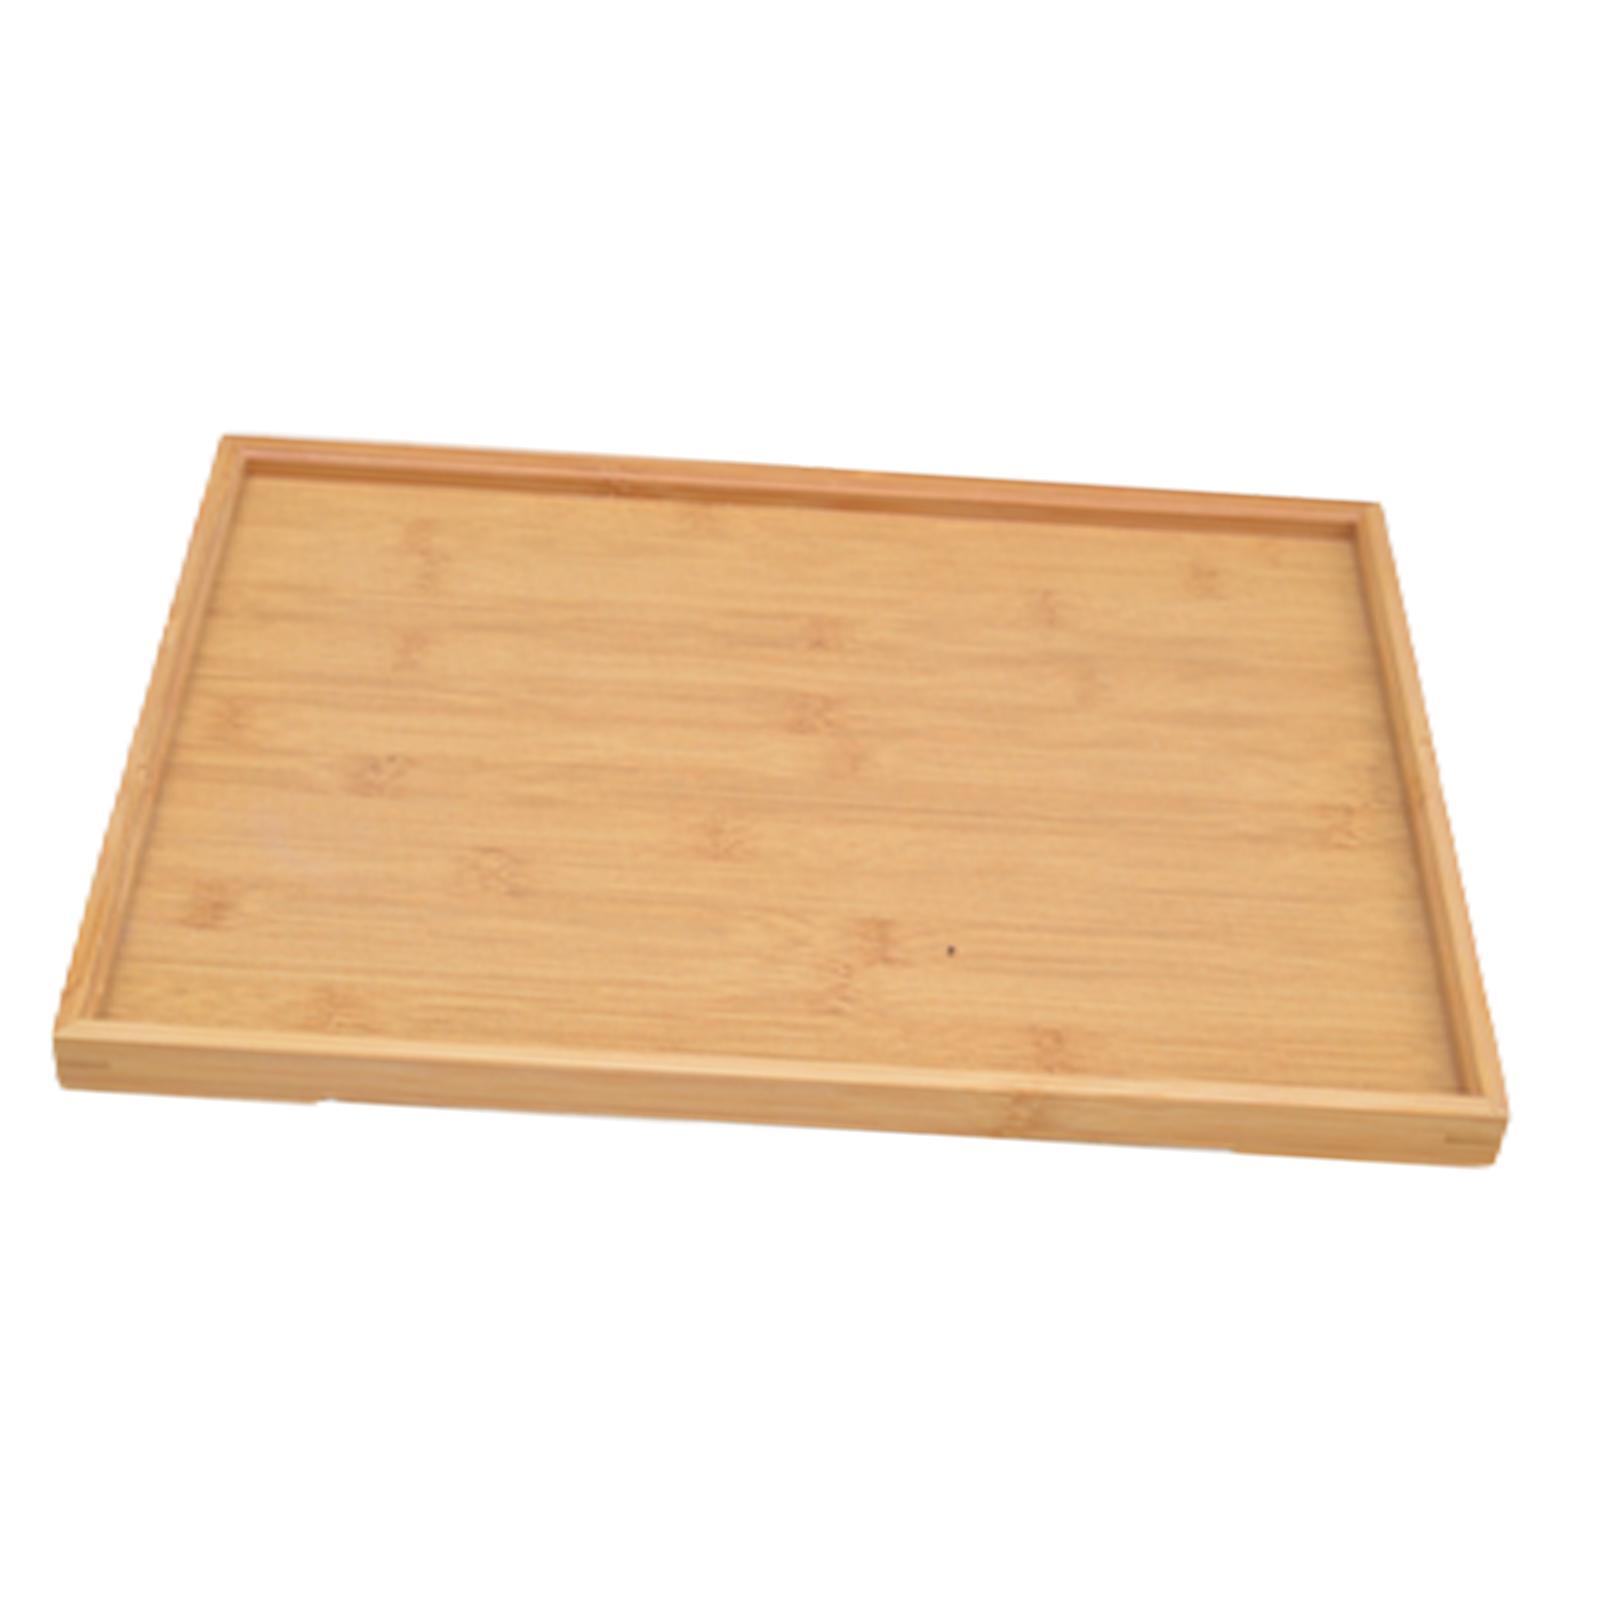 Breakfast Tray Practical Wooden Serving Tray for Living Room Countertop Home